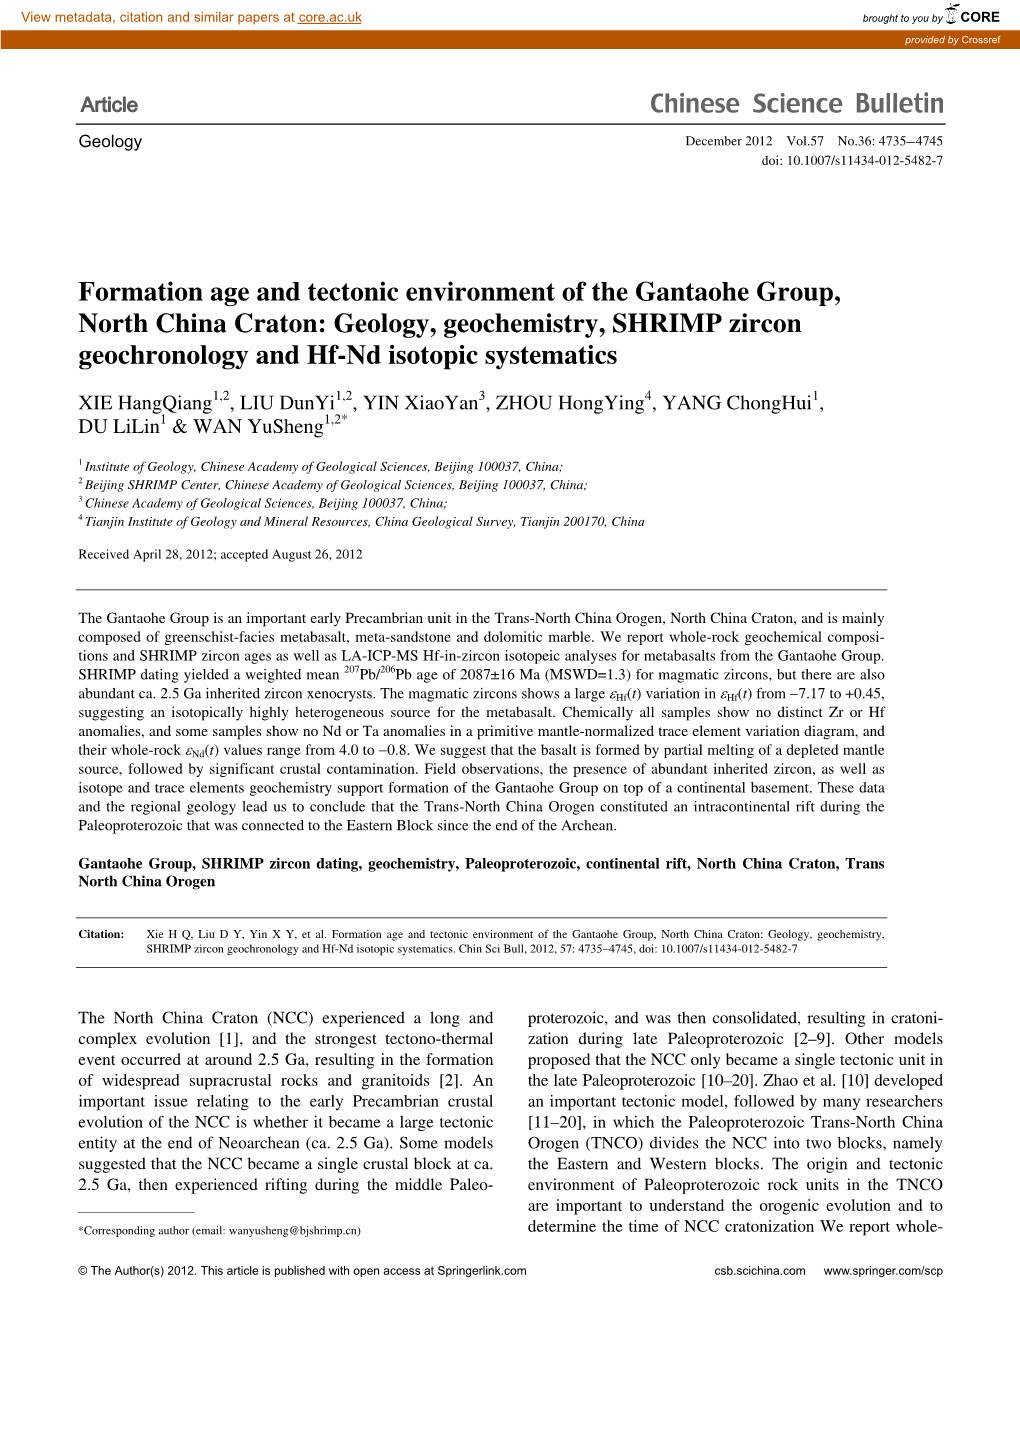 Formation Age and Tectonic Environment of the Gantaohe Group, North China Craton: Geology, Geochemistry, SHRIMP Zircon Geochronology and Hf-Nd Isotopic Systematics